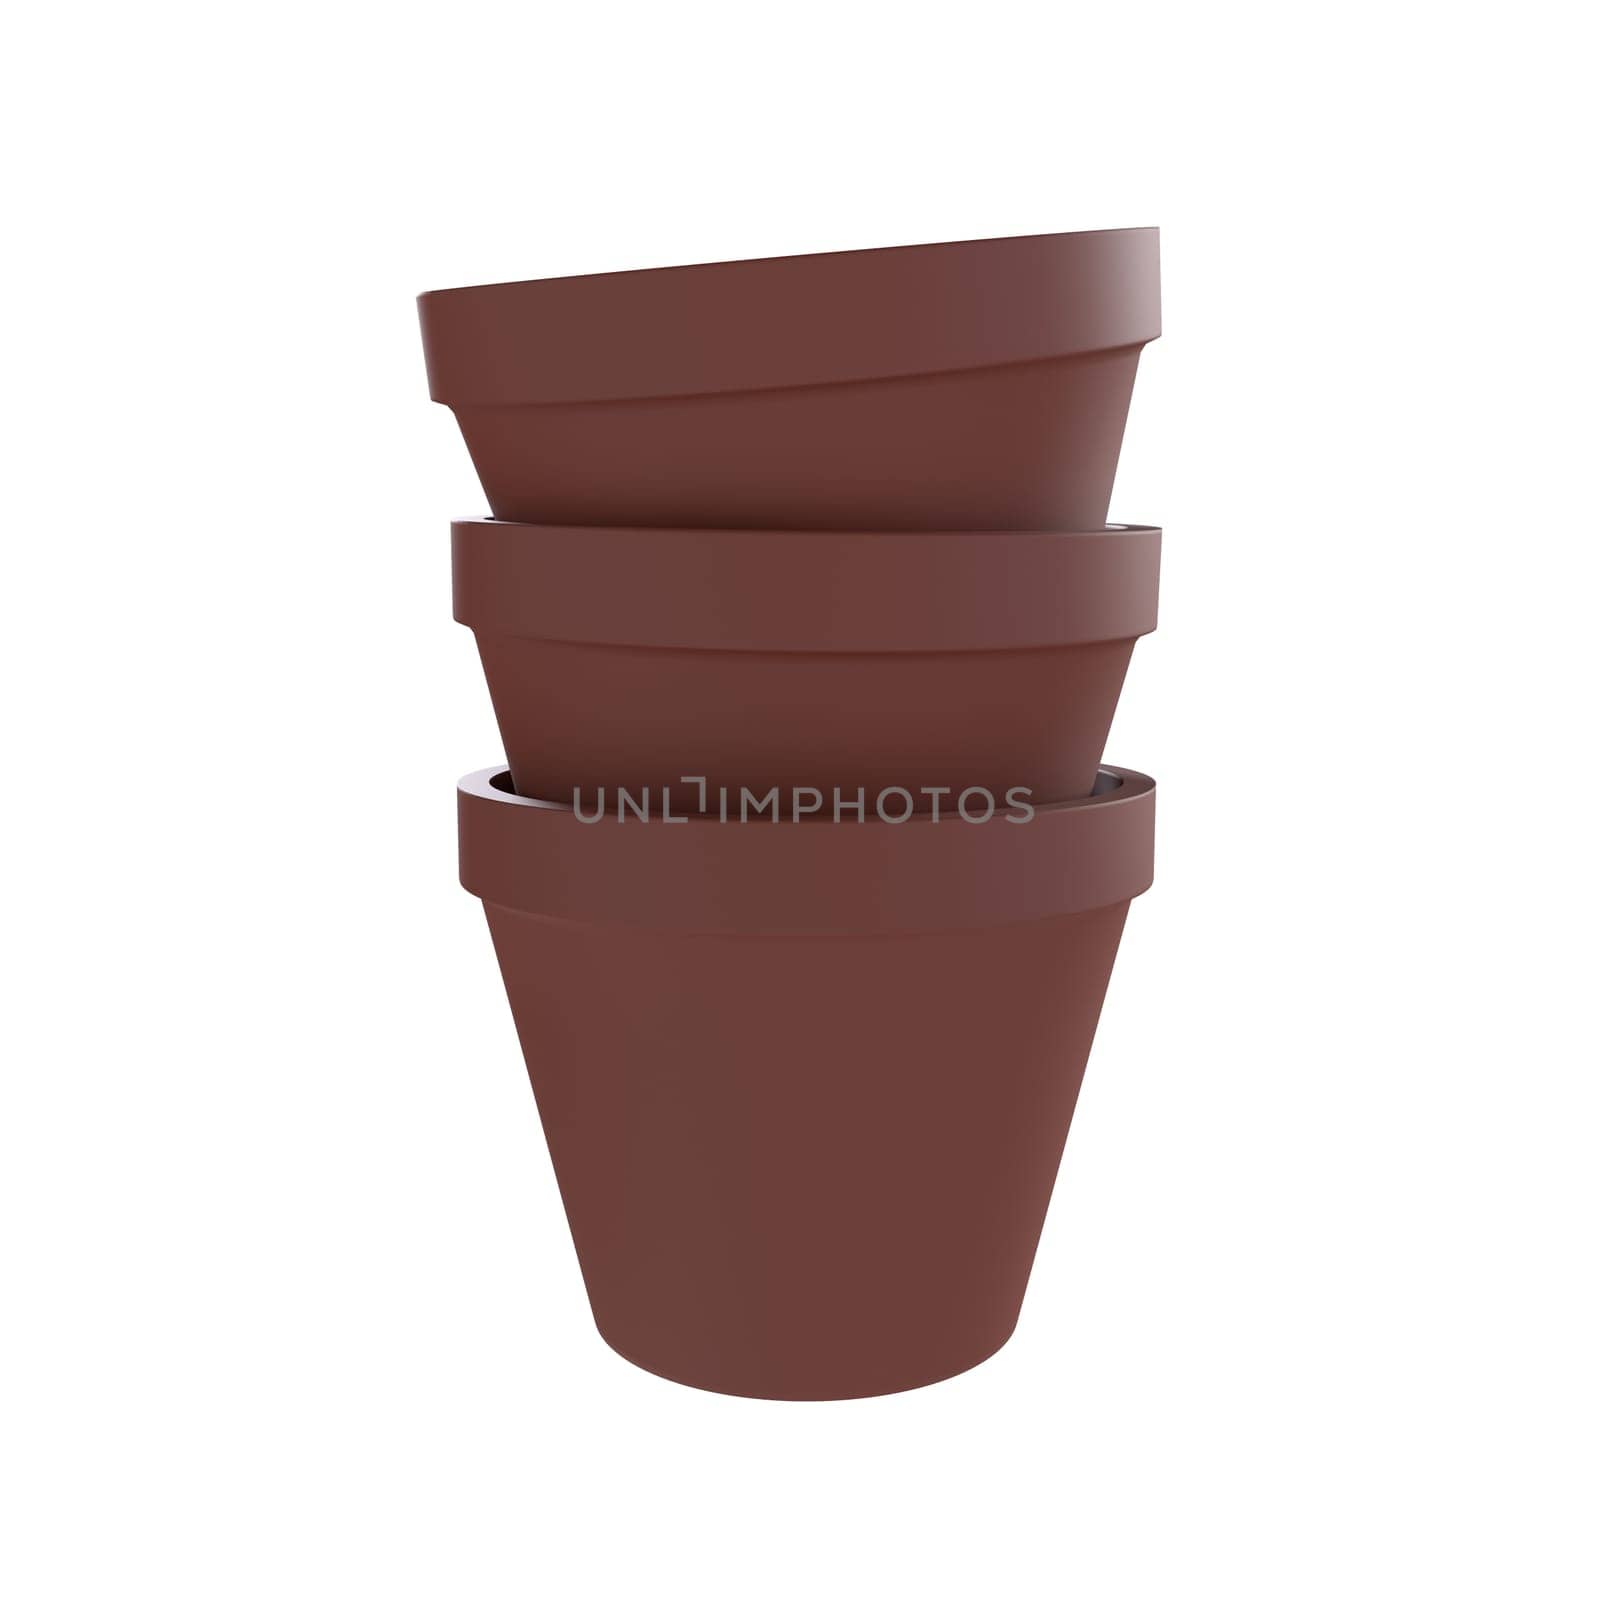 Brown Pot isolated on white background. High quality 3d illustration